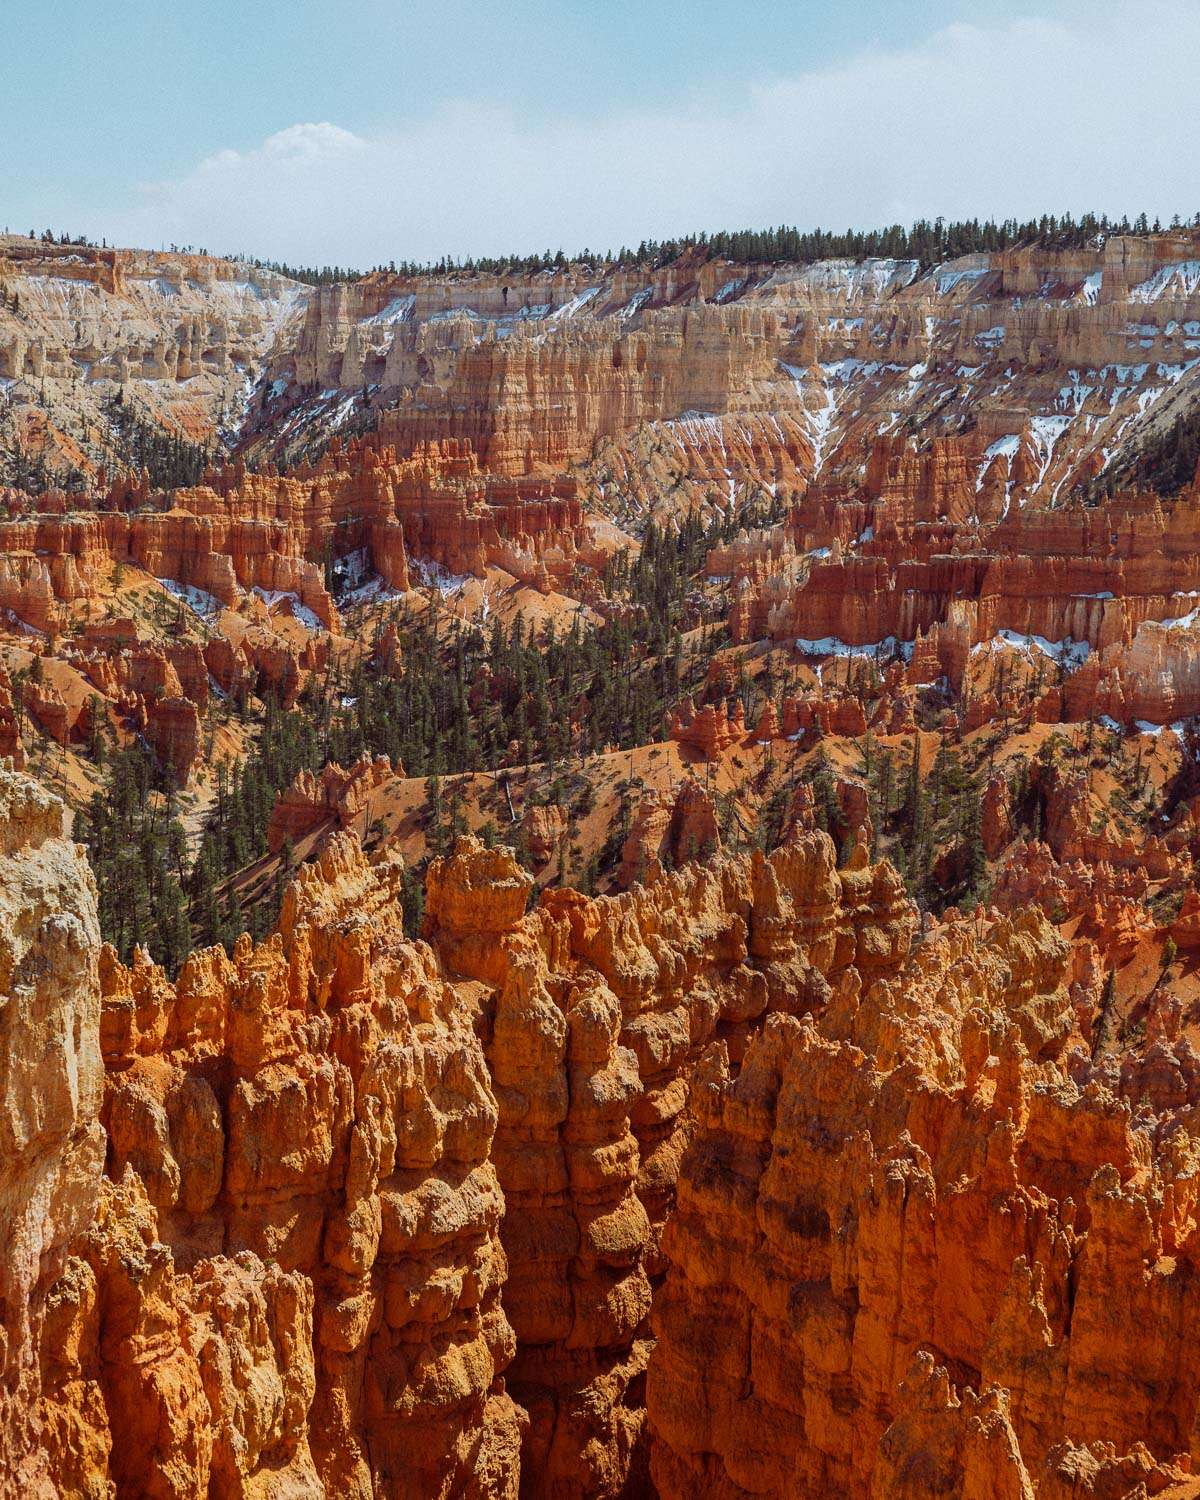 Rachel Off Duty: The Bryce Canyon National Park Ampitheater